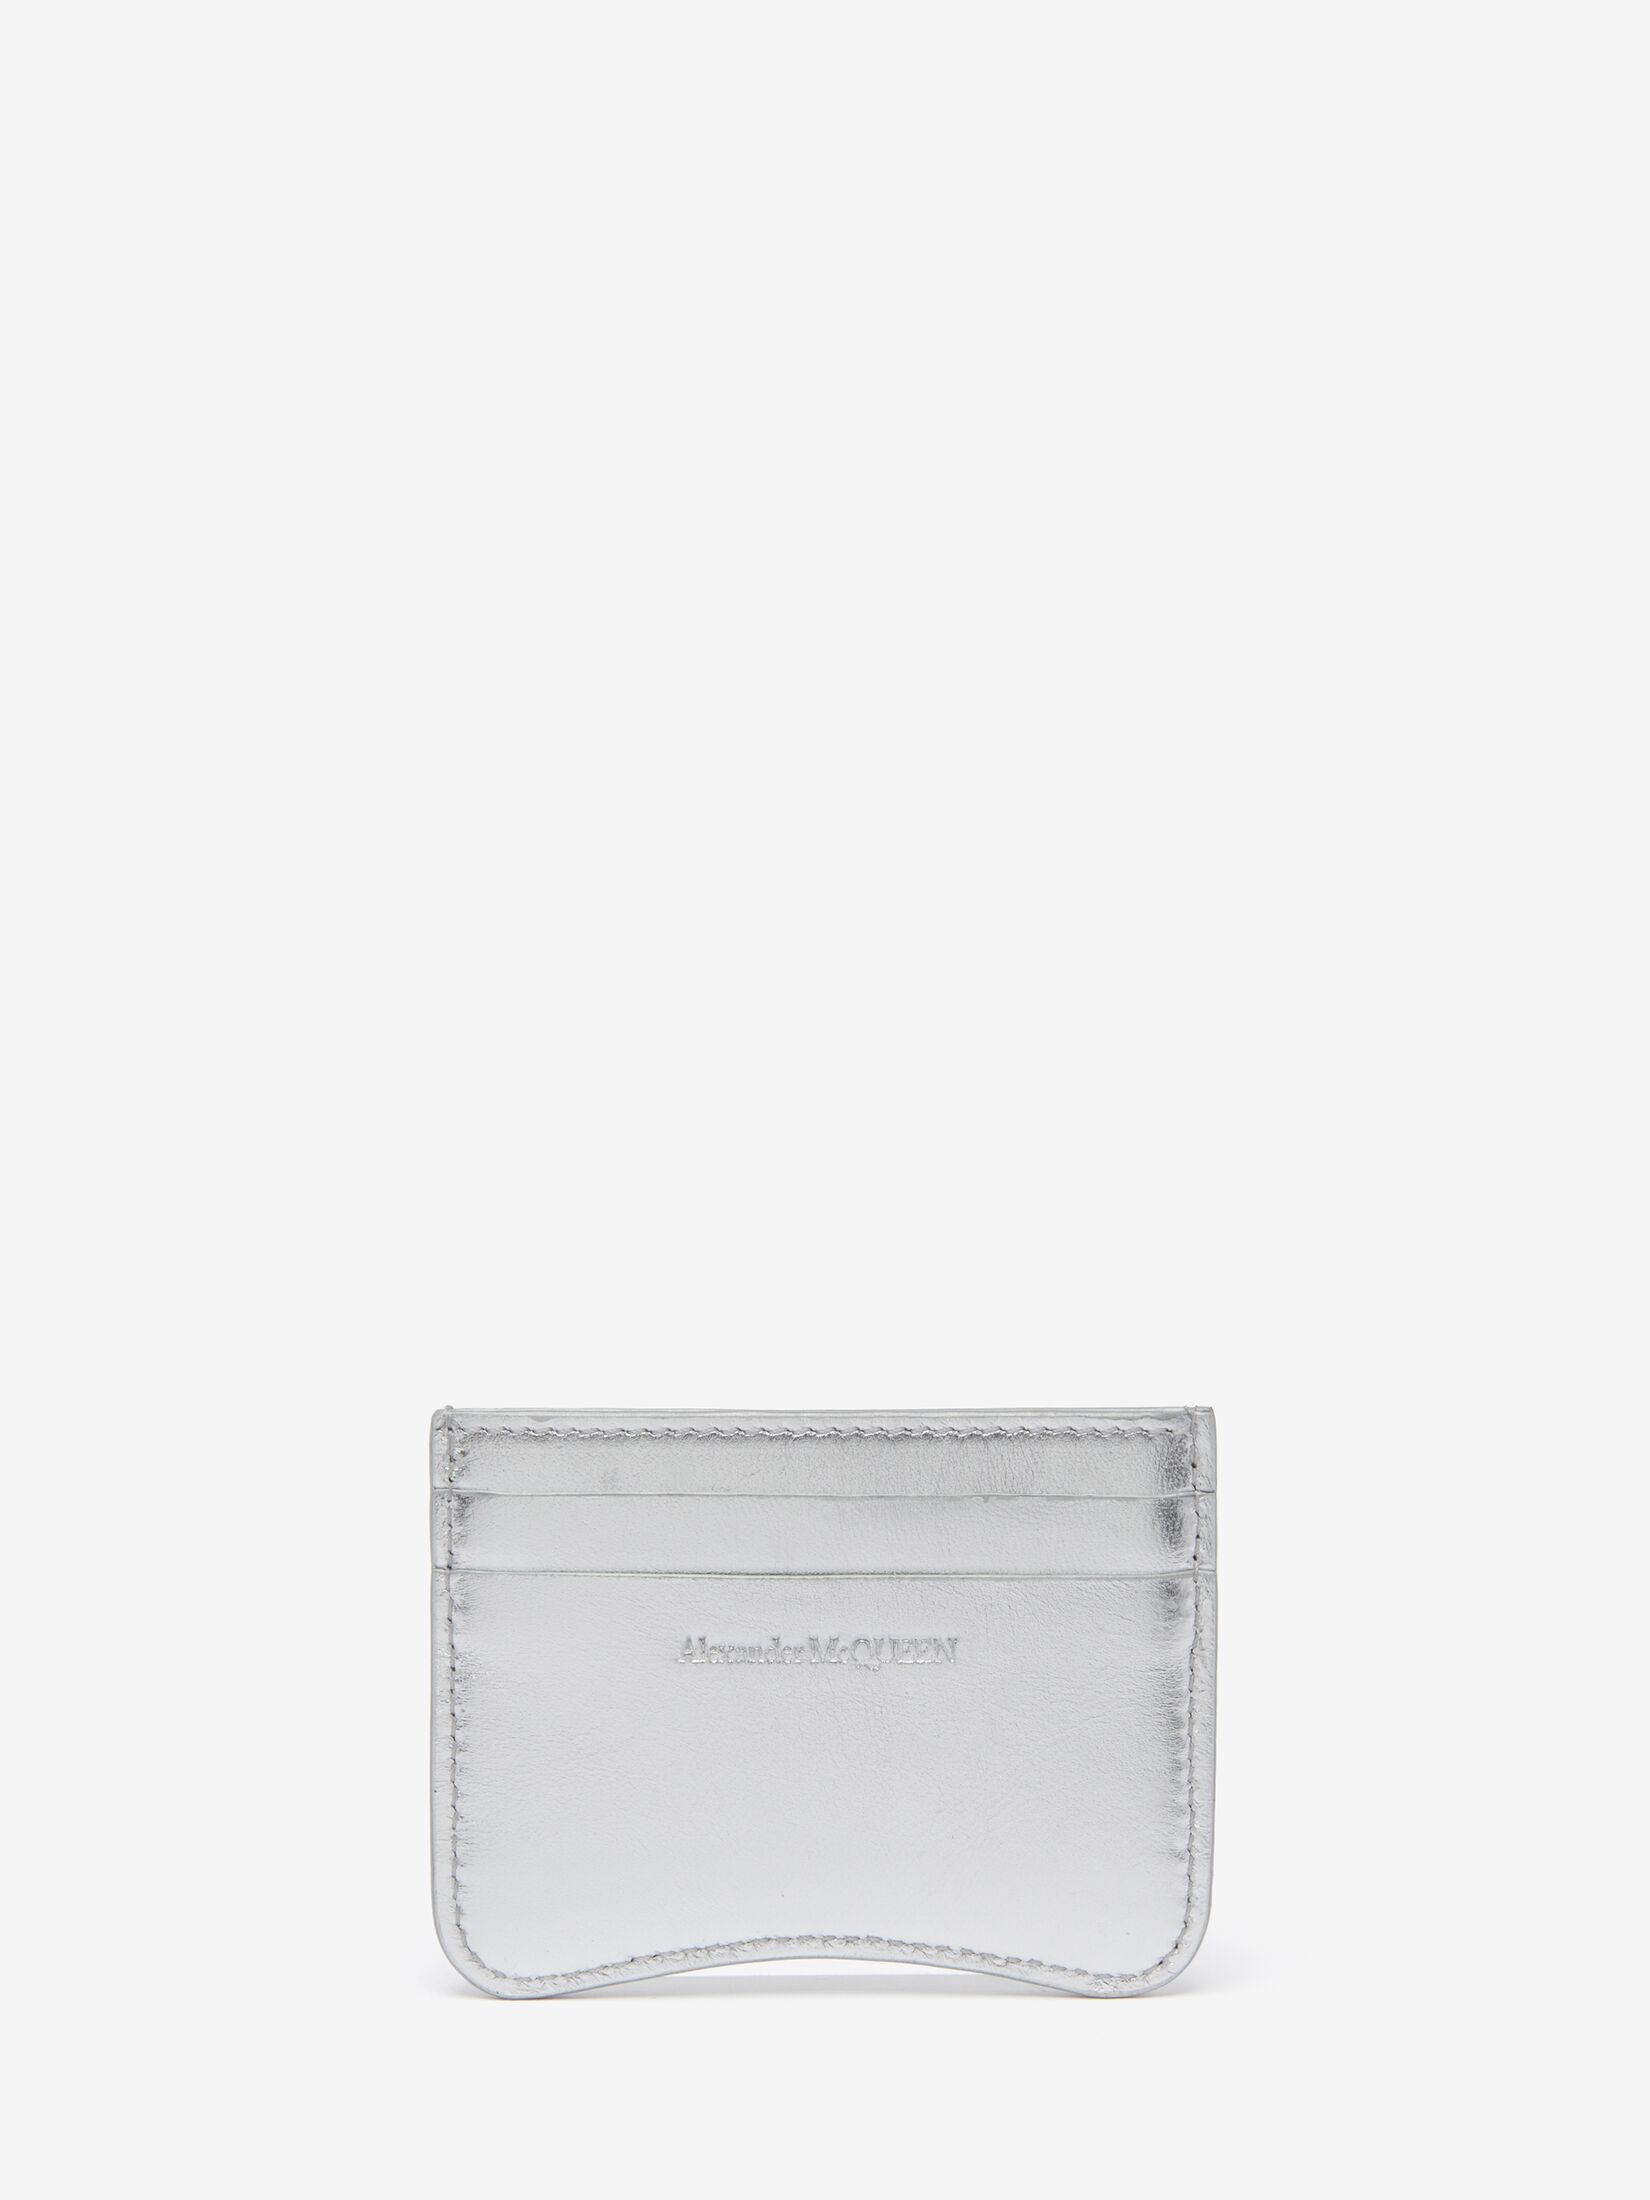 The Seal Card Holder